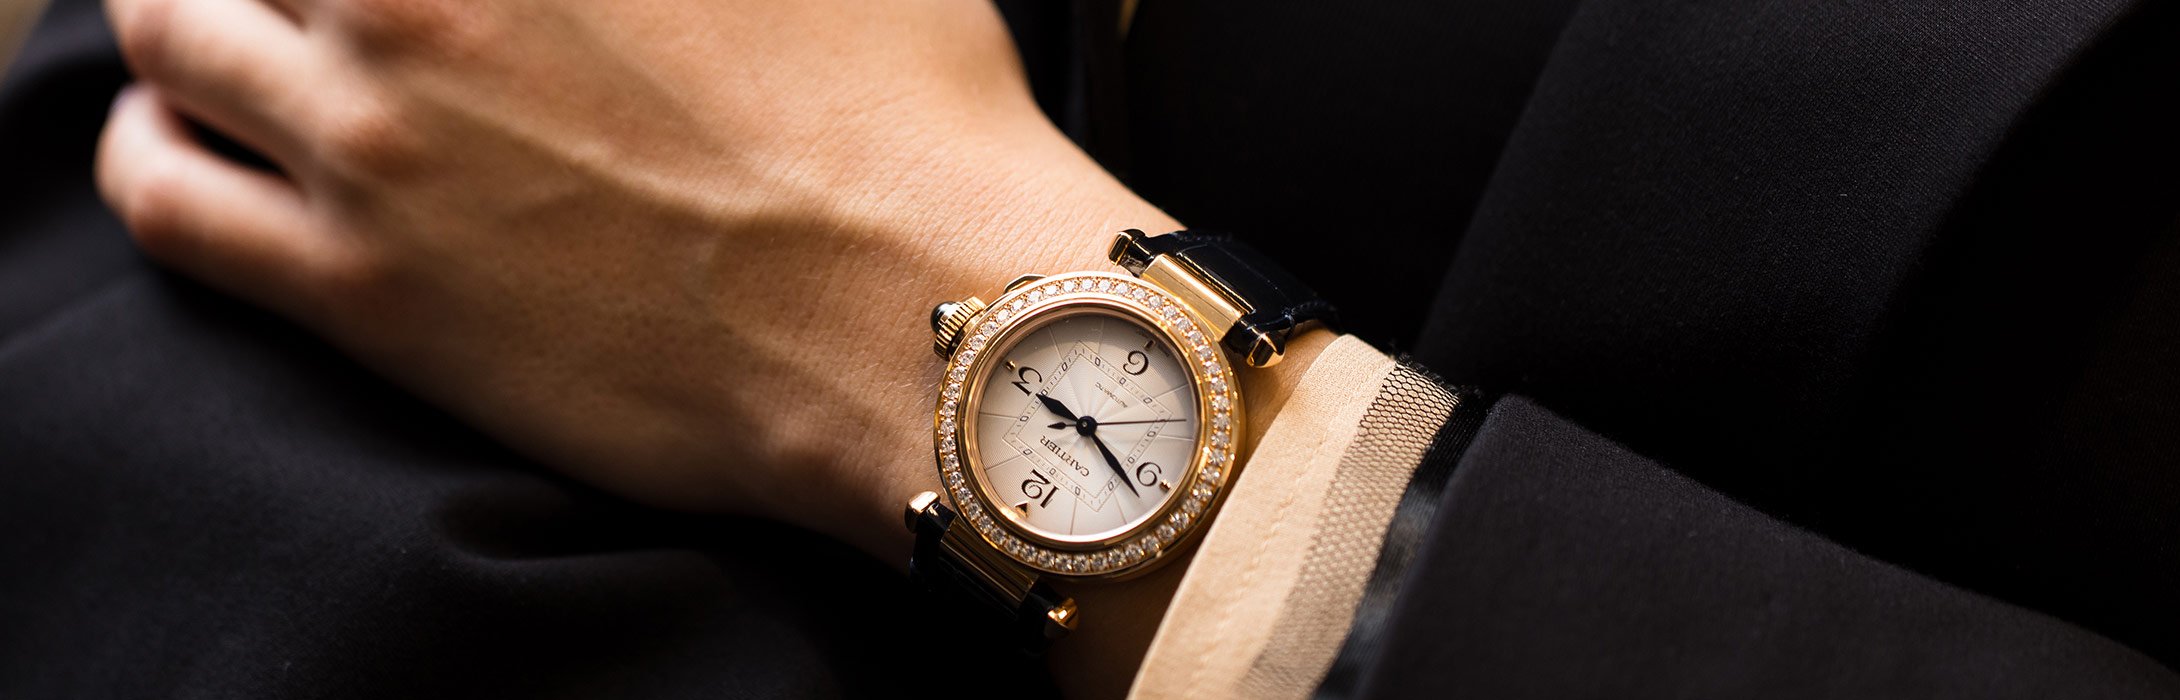 Best High End Women’s Watches: What Ladies Want Out of Their Timepiece